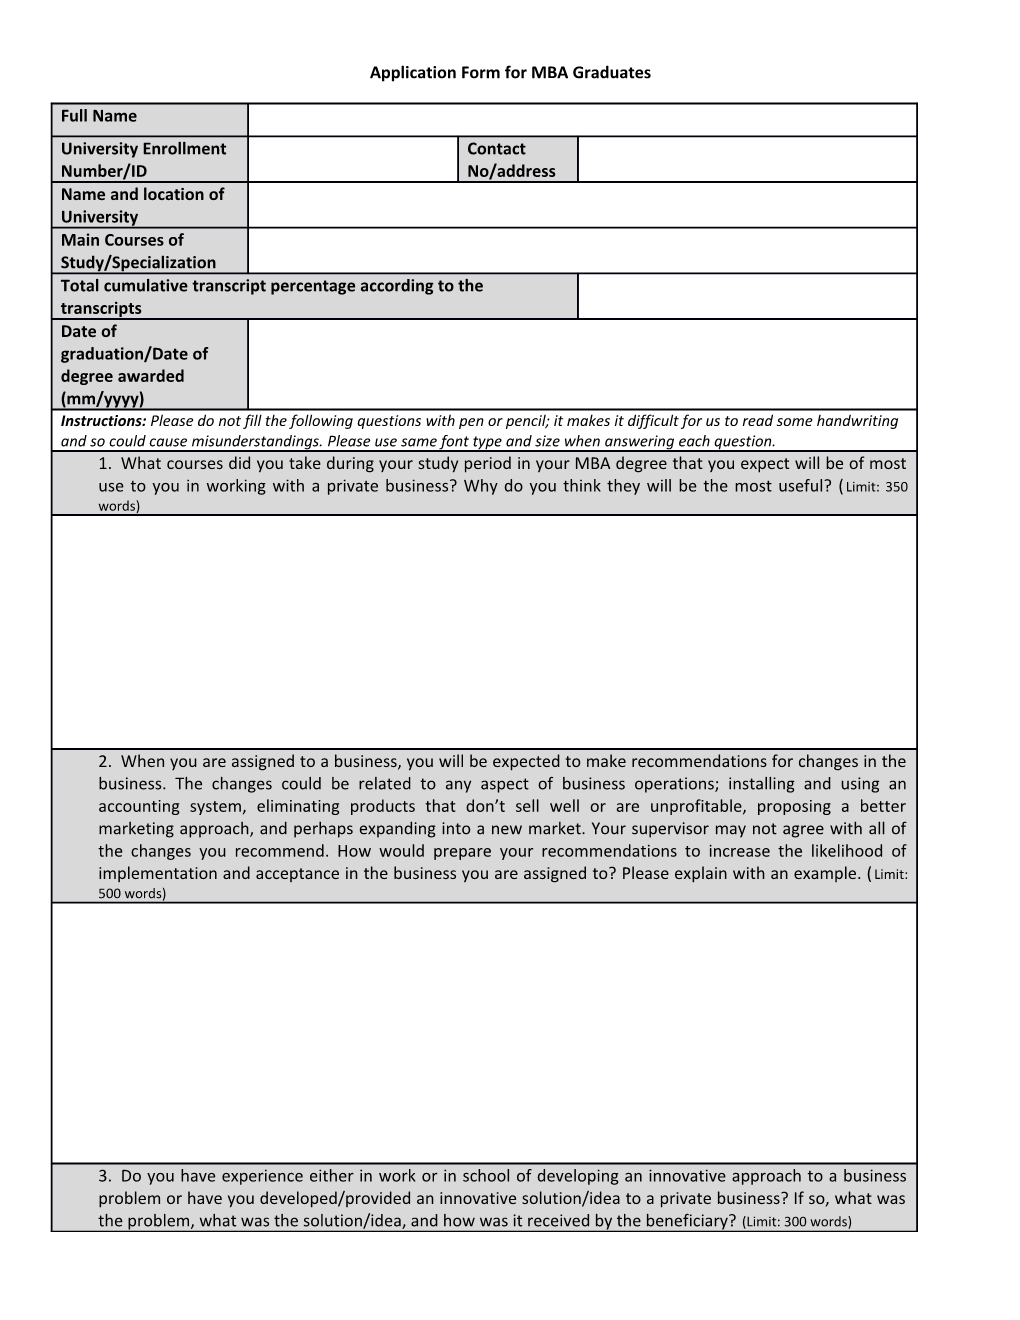 Application Form for MBA Graduates